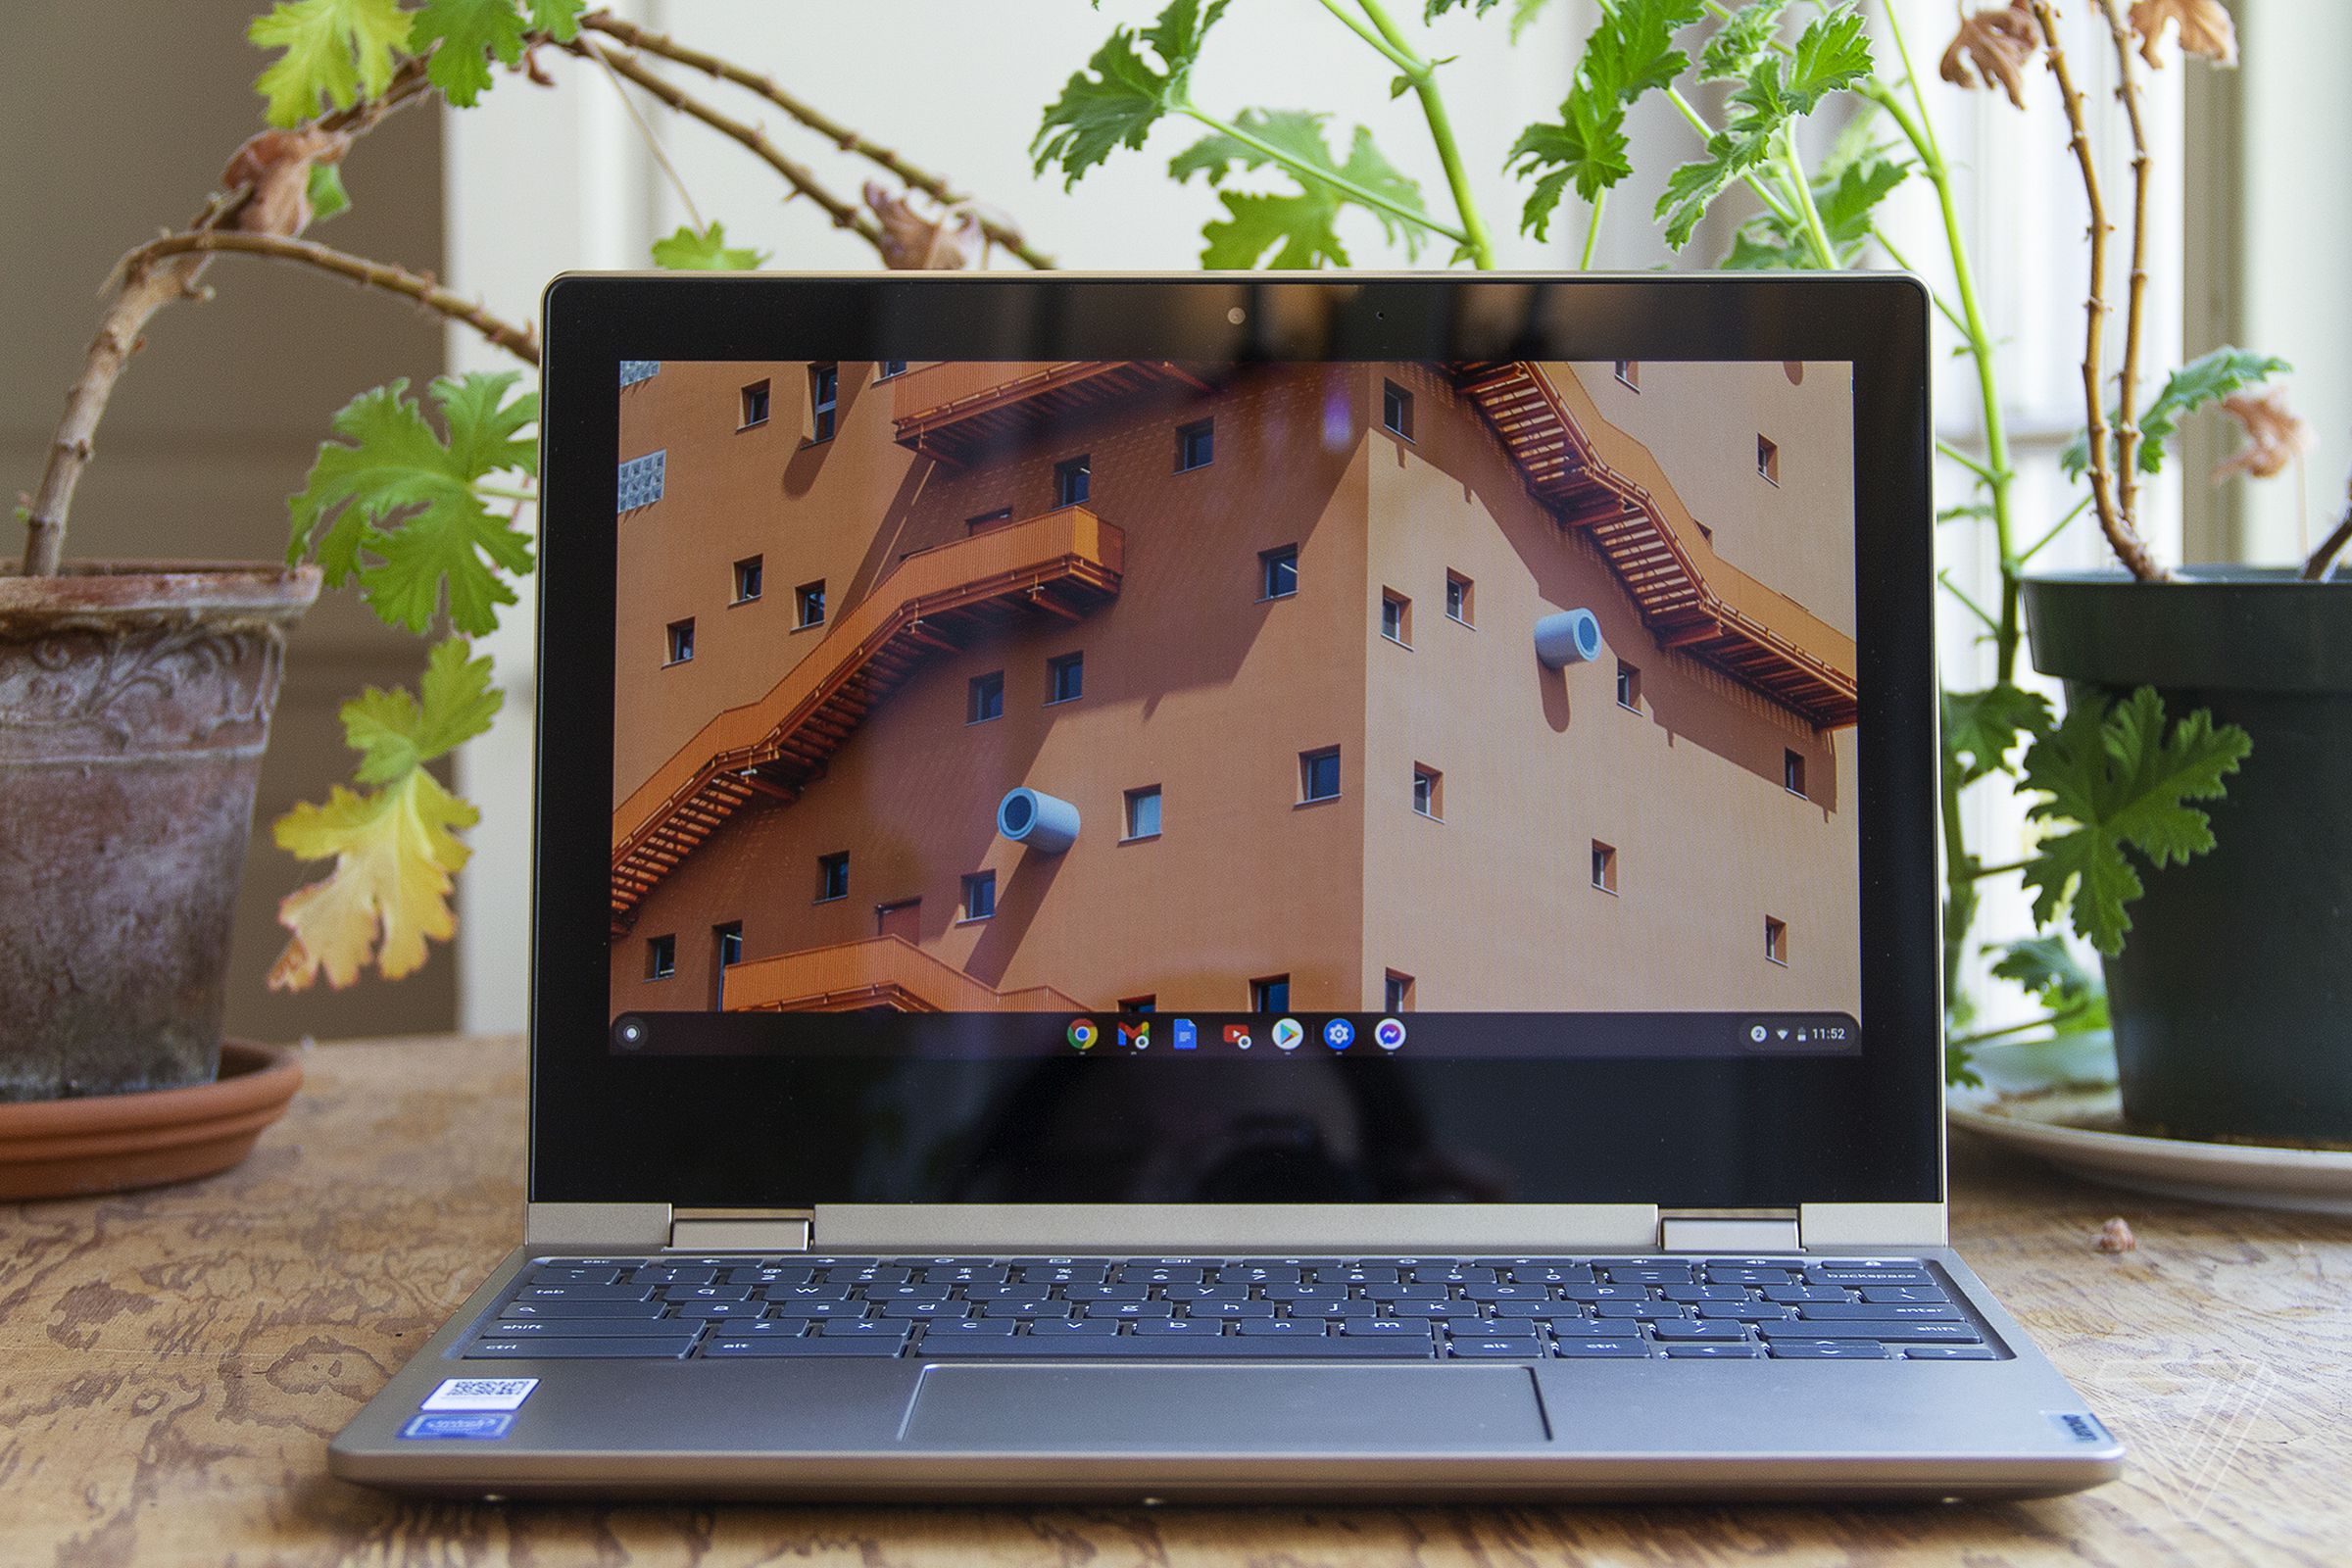 The Lenovo Ideapad Flex 3 Chromebook sits open on a table in front of two houseplants. The screen displays the upper windows of a large building.